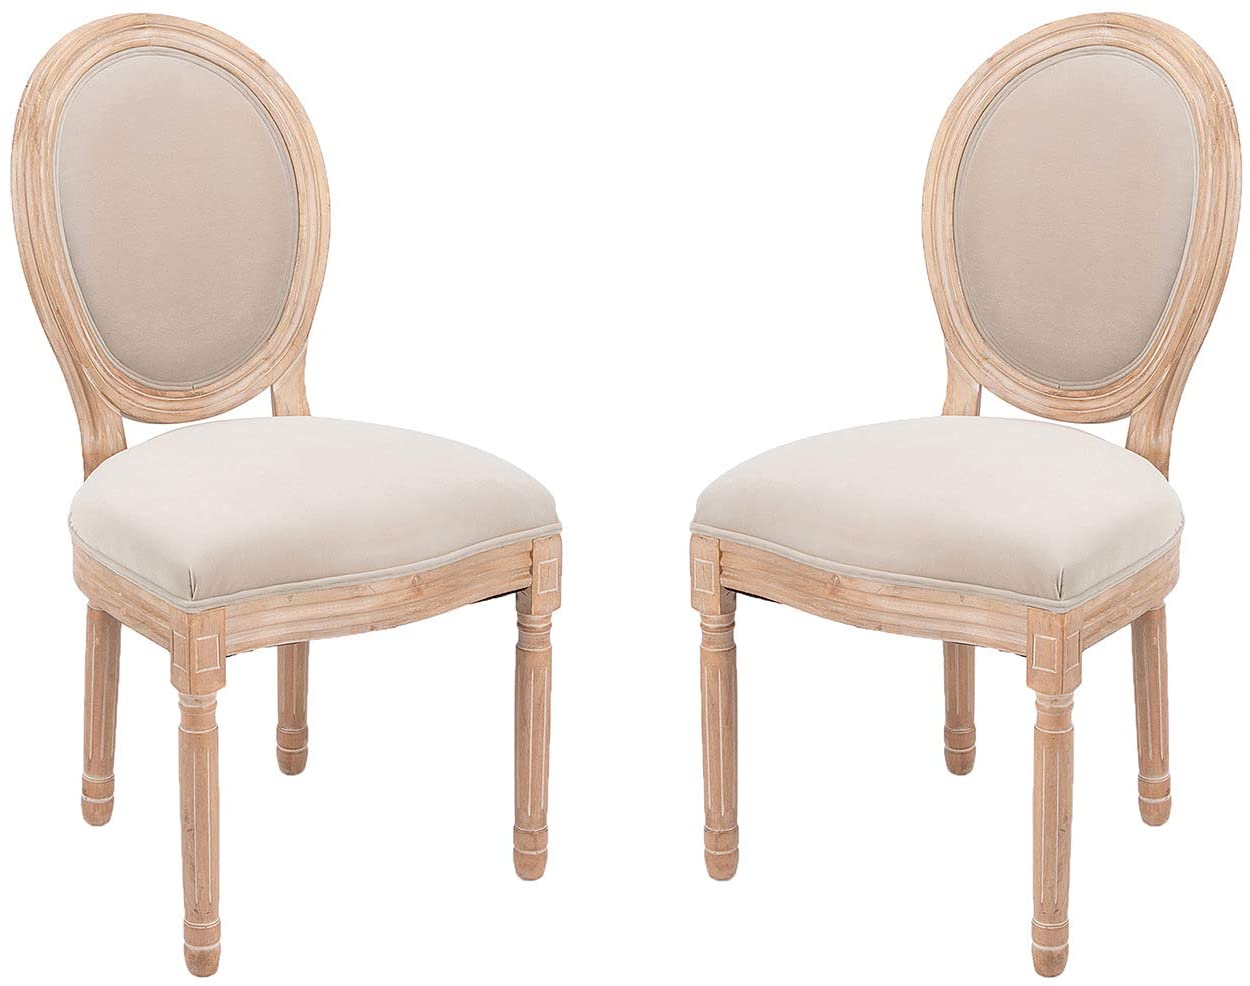 B08PZFTMM7 Dining Chair Set of 2 Classic Fabric Material Upholstered Chair for Kitchen Dining Room (2, Beige)